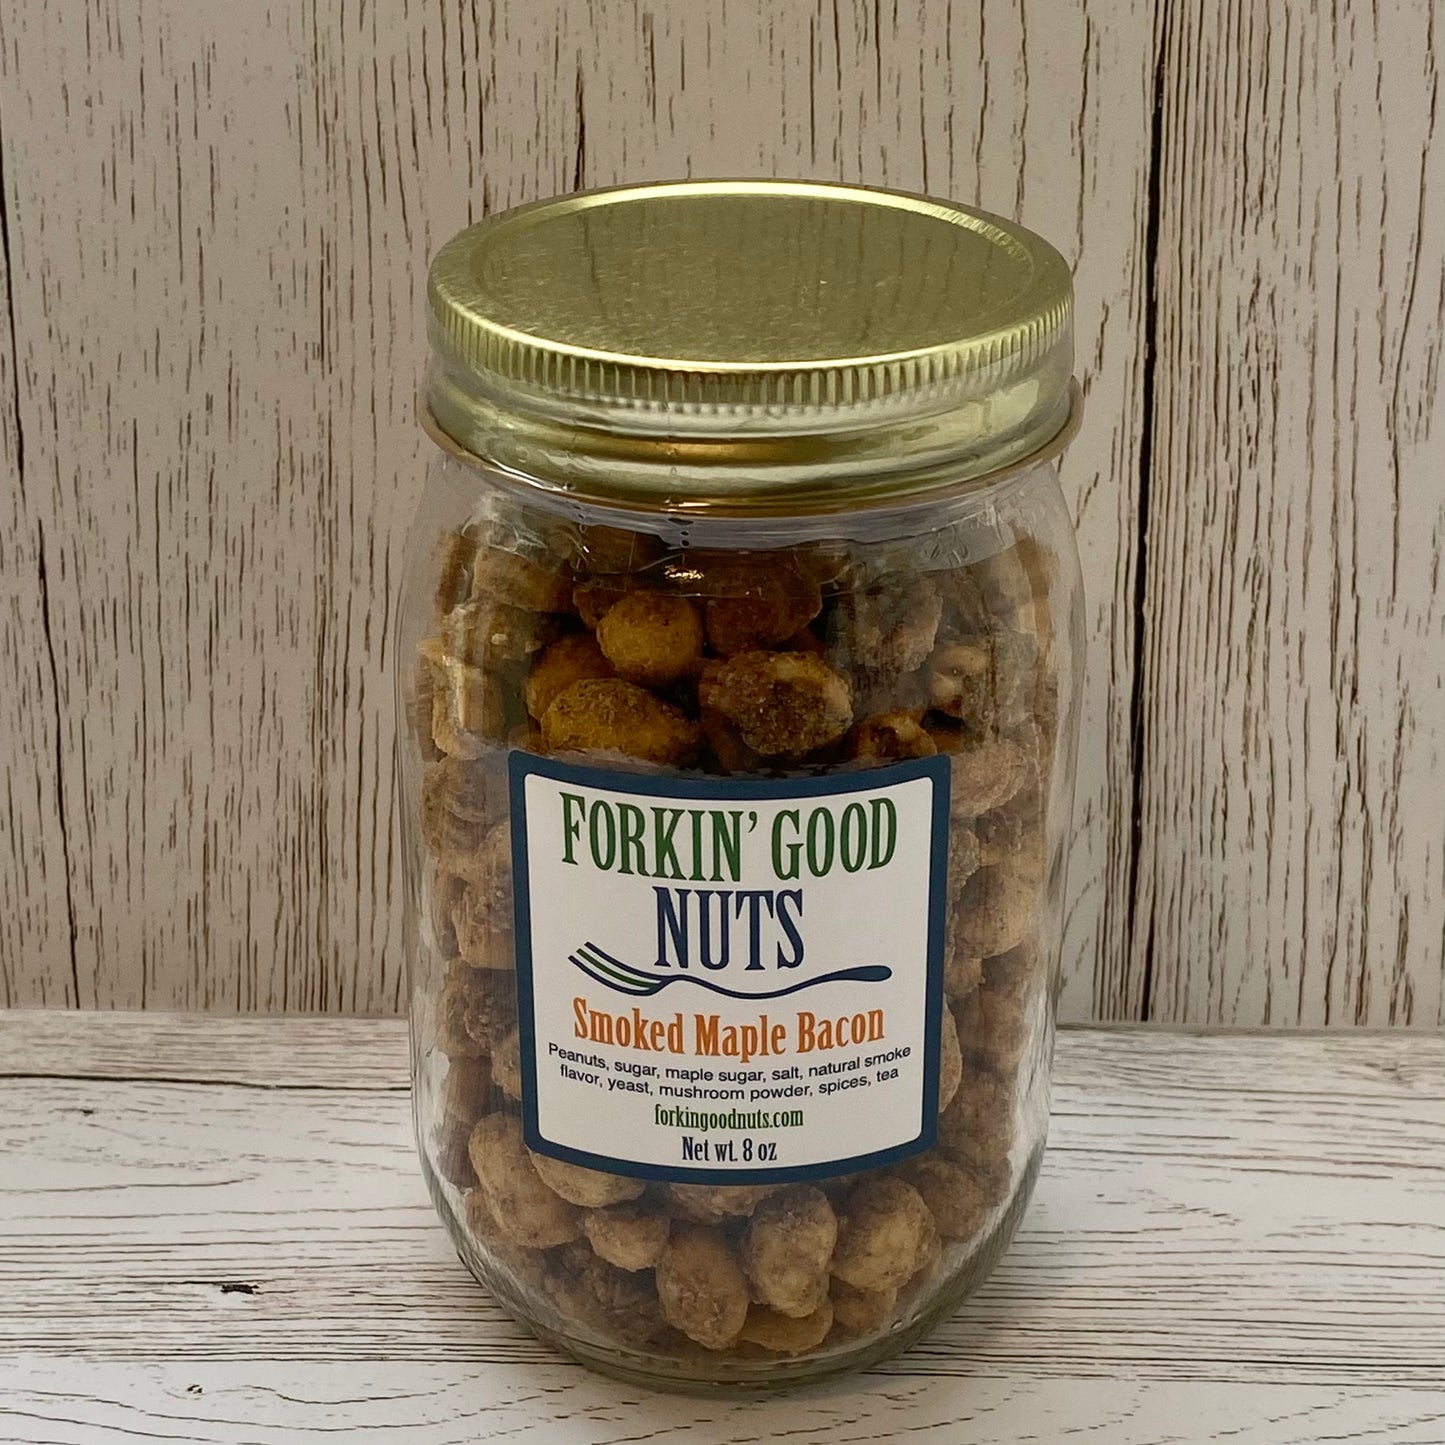 Smoked Maple Bacon Nuts